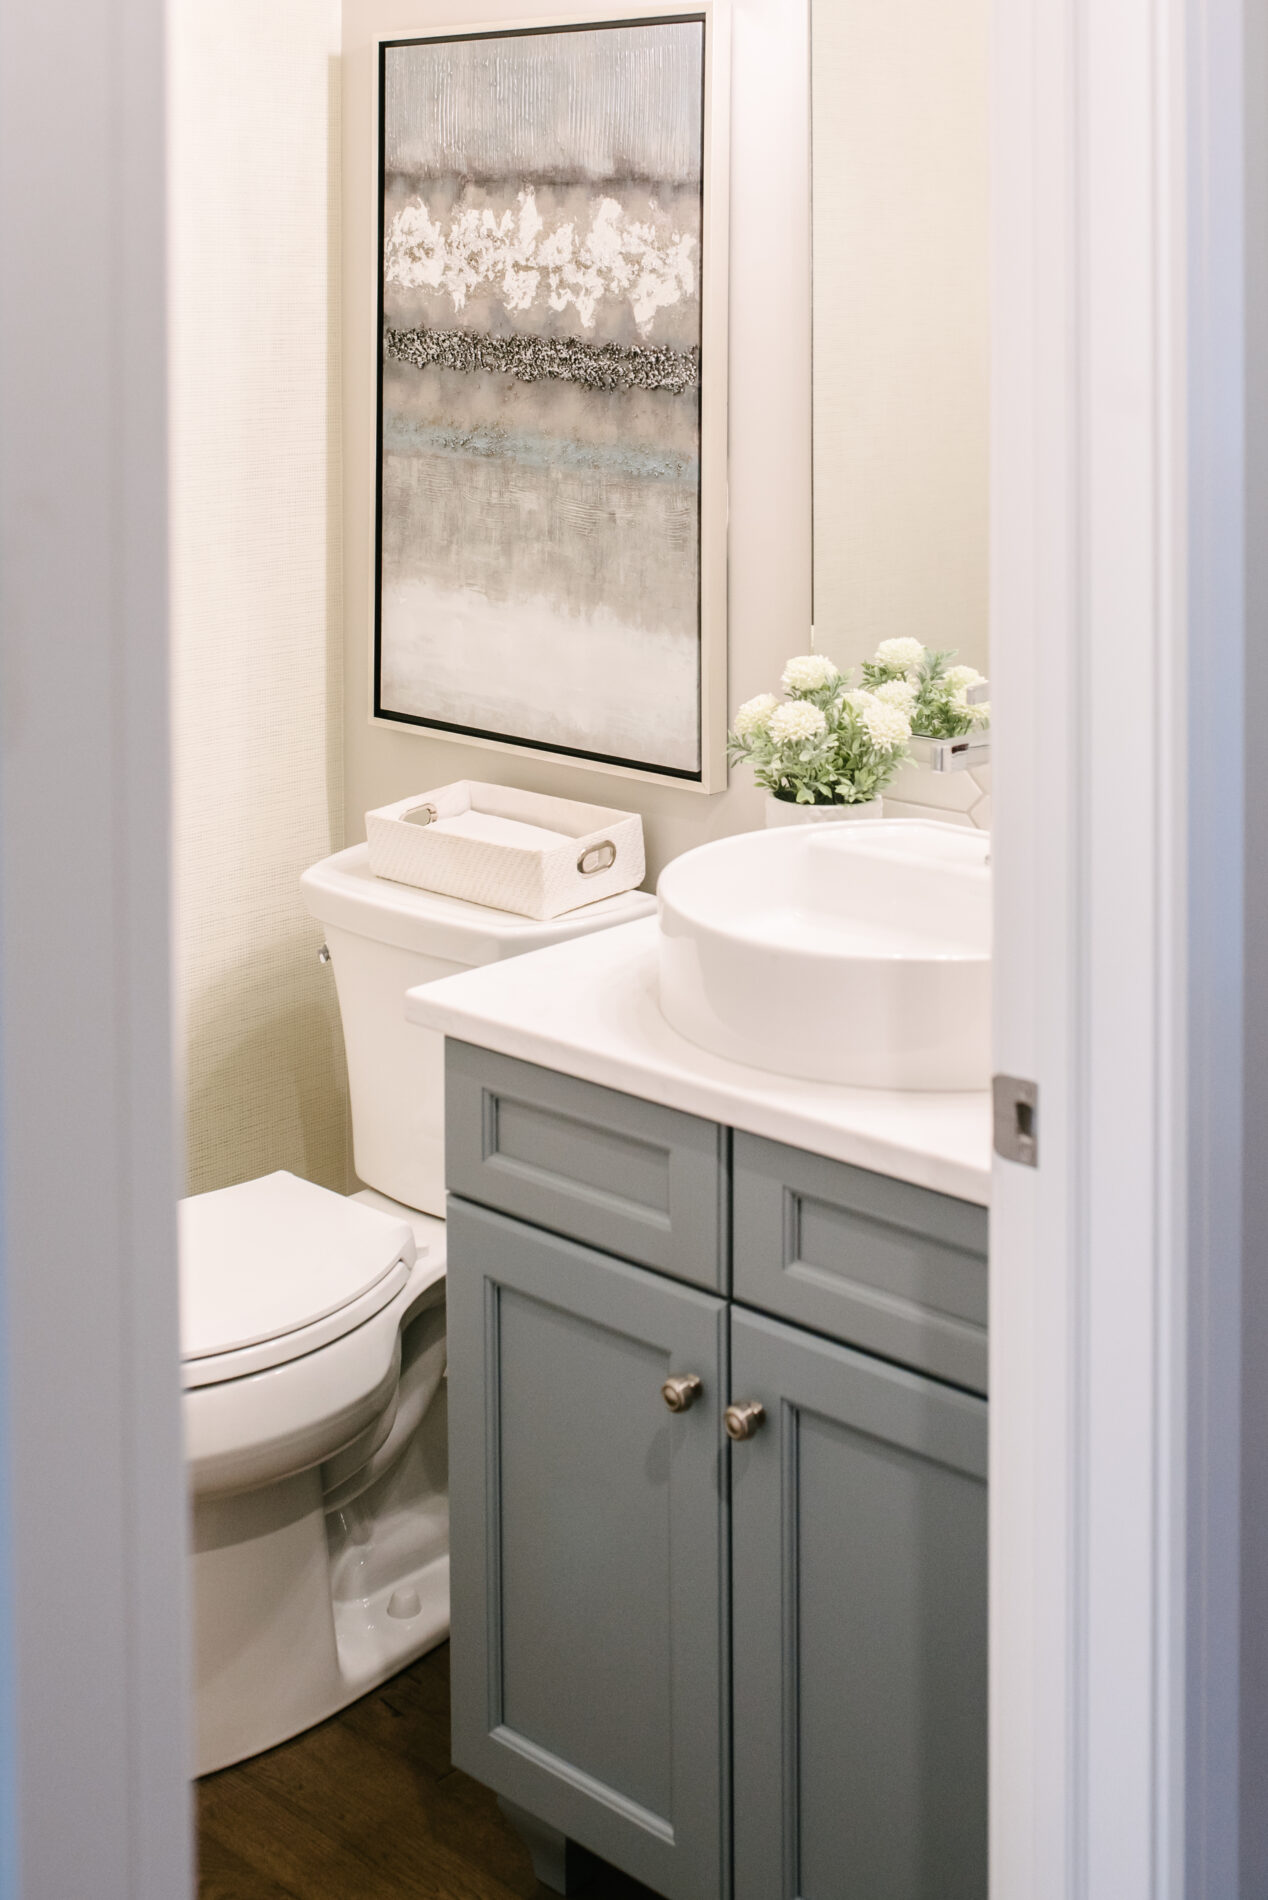 A cozy half bathroom of the Kalliope showhome in Ardrossan with light blue cabinetry, white countertops, a vessel sink and some complementing wall art